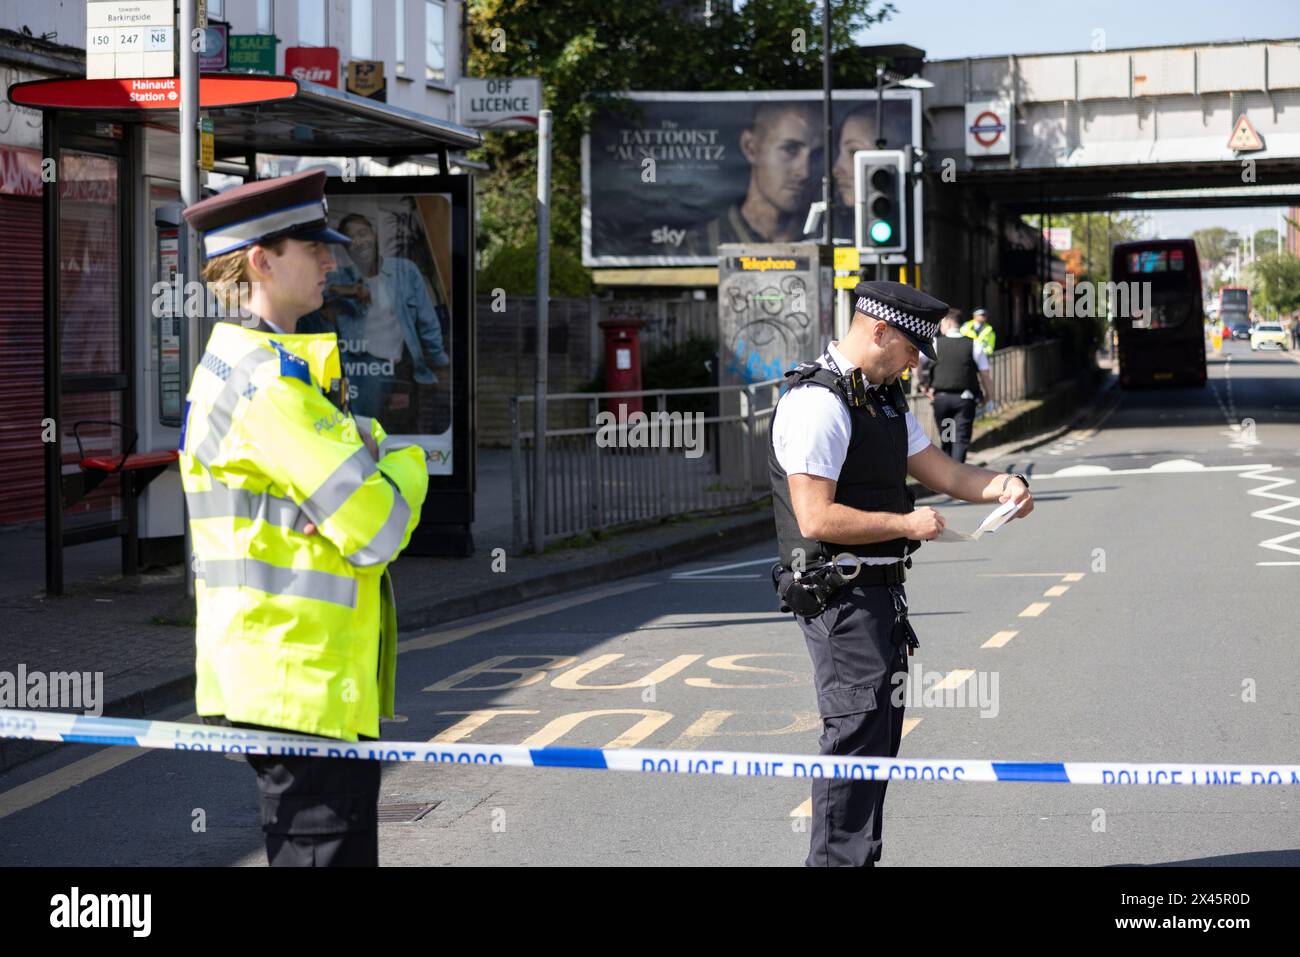 Police and other emergency services in Hainault, east London, at a serious incident in which a man with a sword was arrested after attacking people. Stock Photo